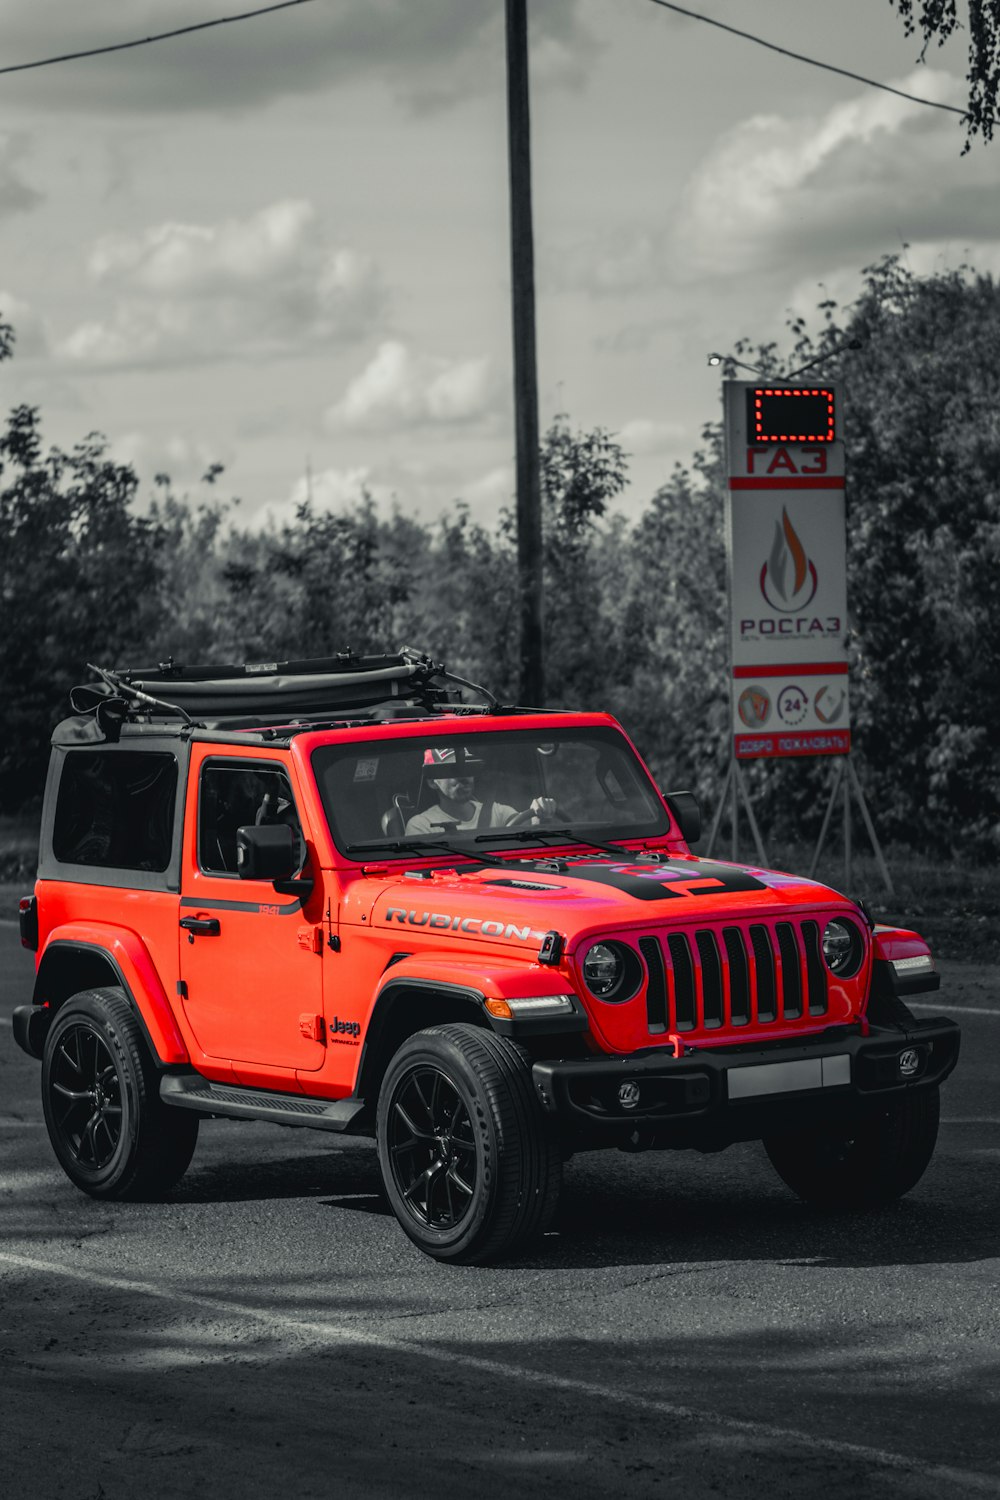 A red jeep parked in front of a louis vuitton store photo – Free Hamburg  Image on Unsplash